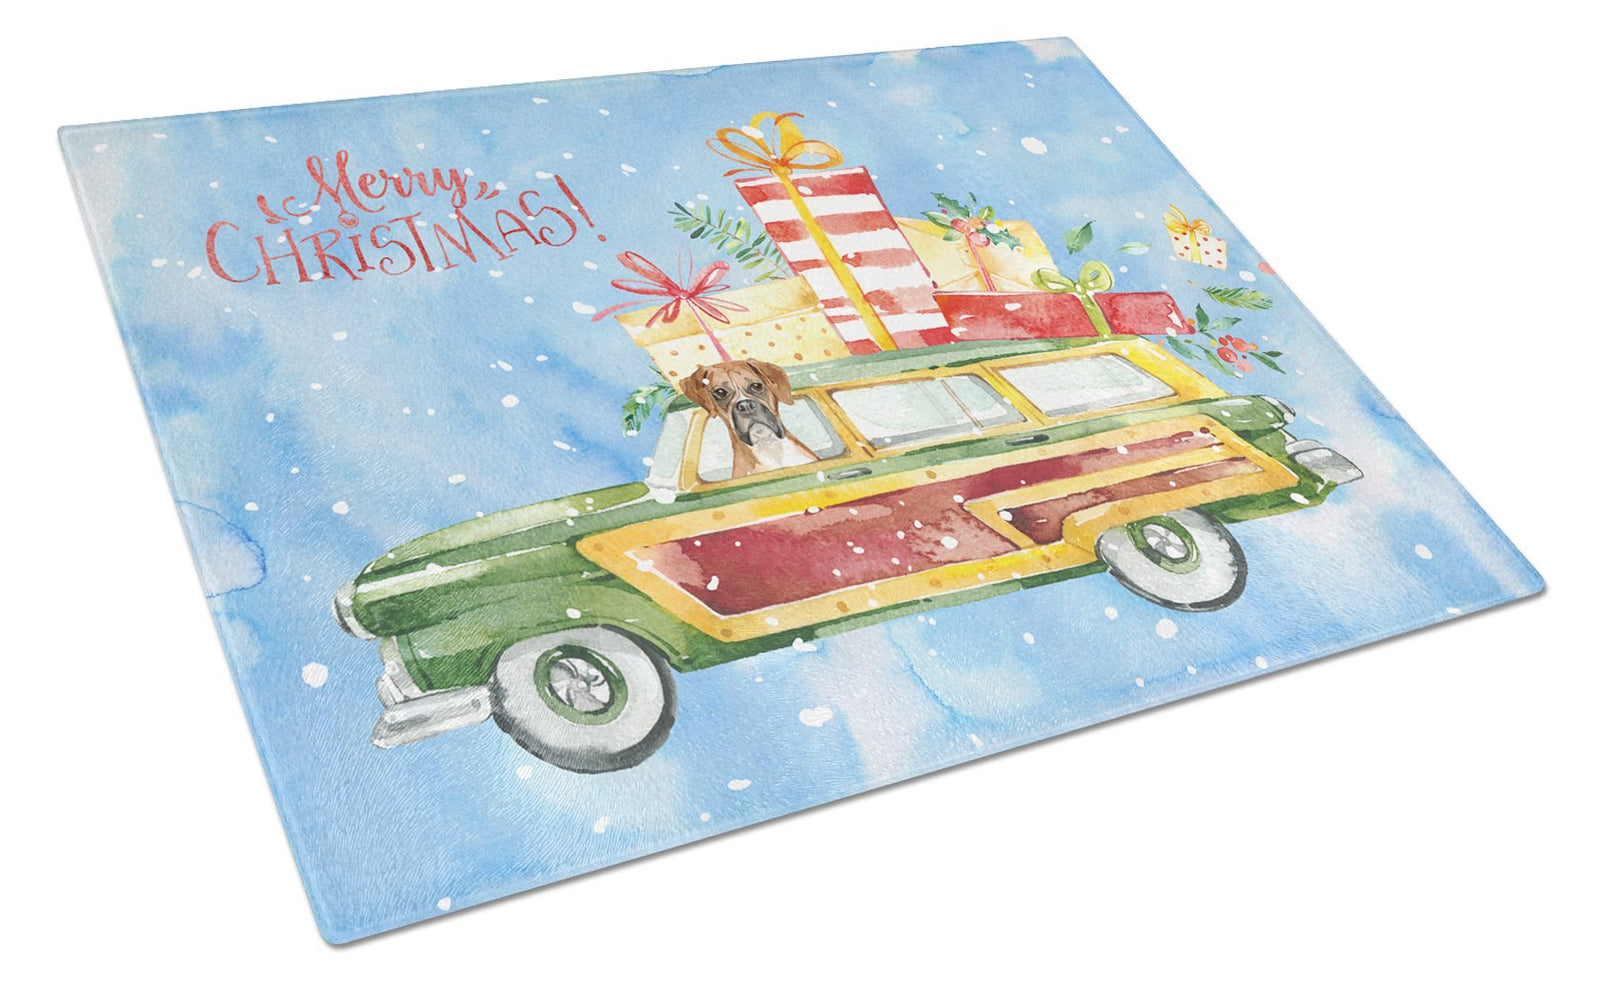 Merry Christmas Boxer Glass Cutting Board Large CK2399LCB by Caroline's Treasures